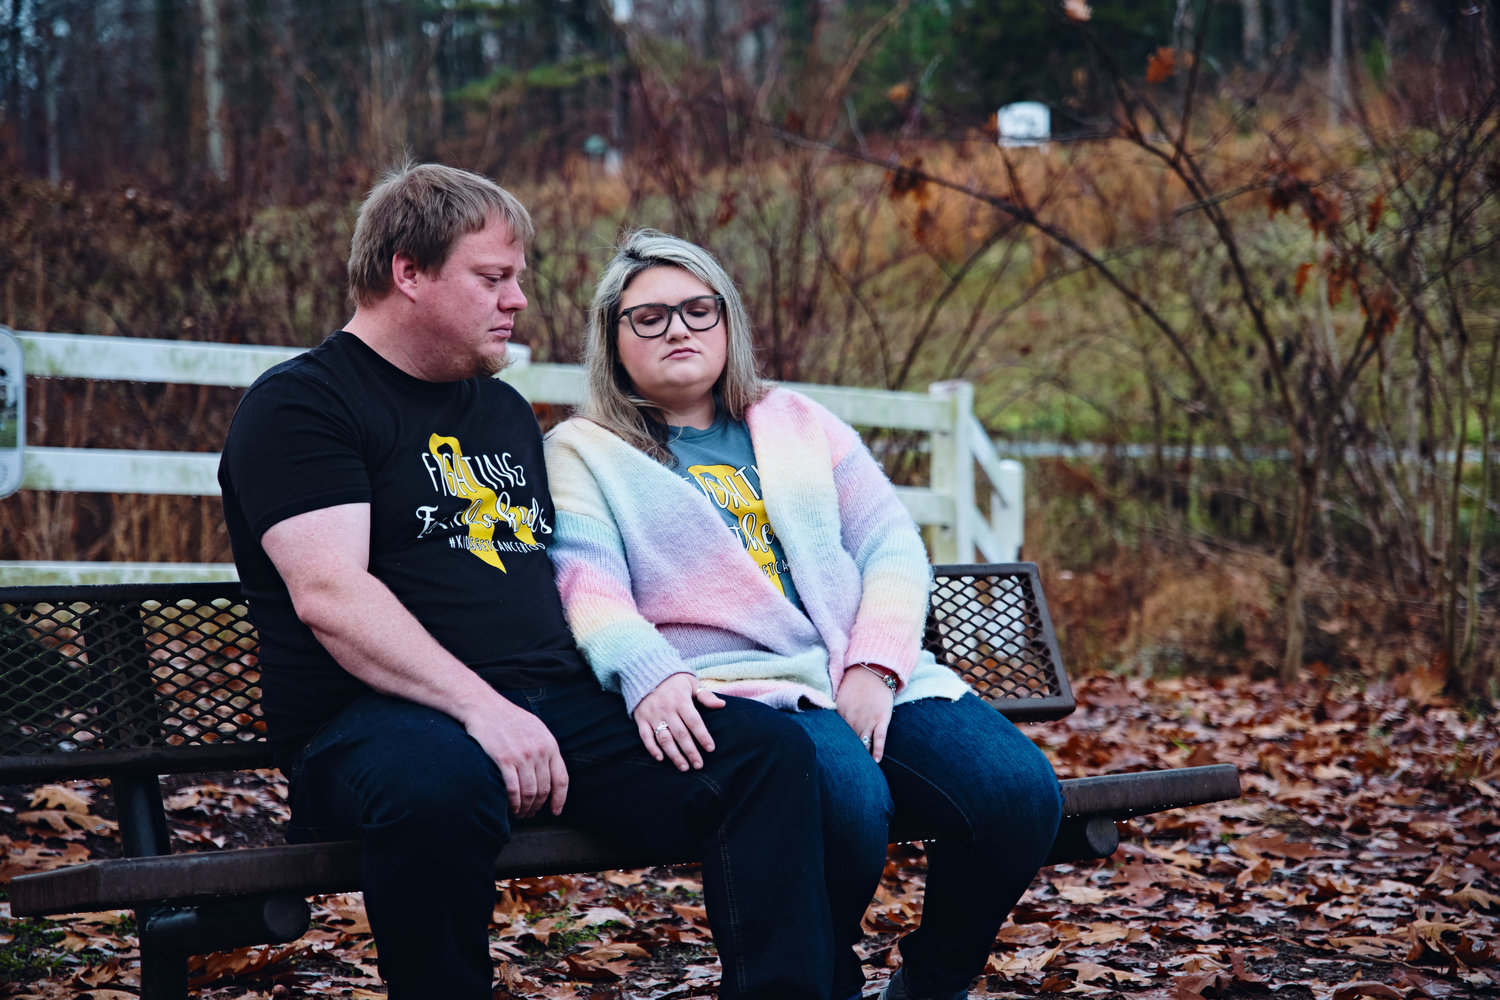 Dusty and Meghan Scoggins sit at a bench in Boling Lane Park in Siler City, where they would often bring their 5-year-old daughter Kenzie before her passing in September. Kenzie was diagnosed with diffuse intrinsic pontine glioma (DIPG) almost a year ago today.